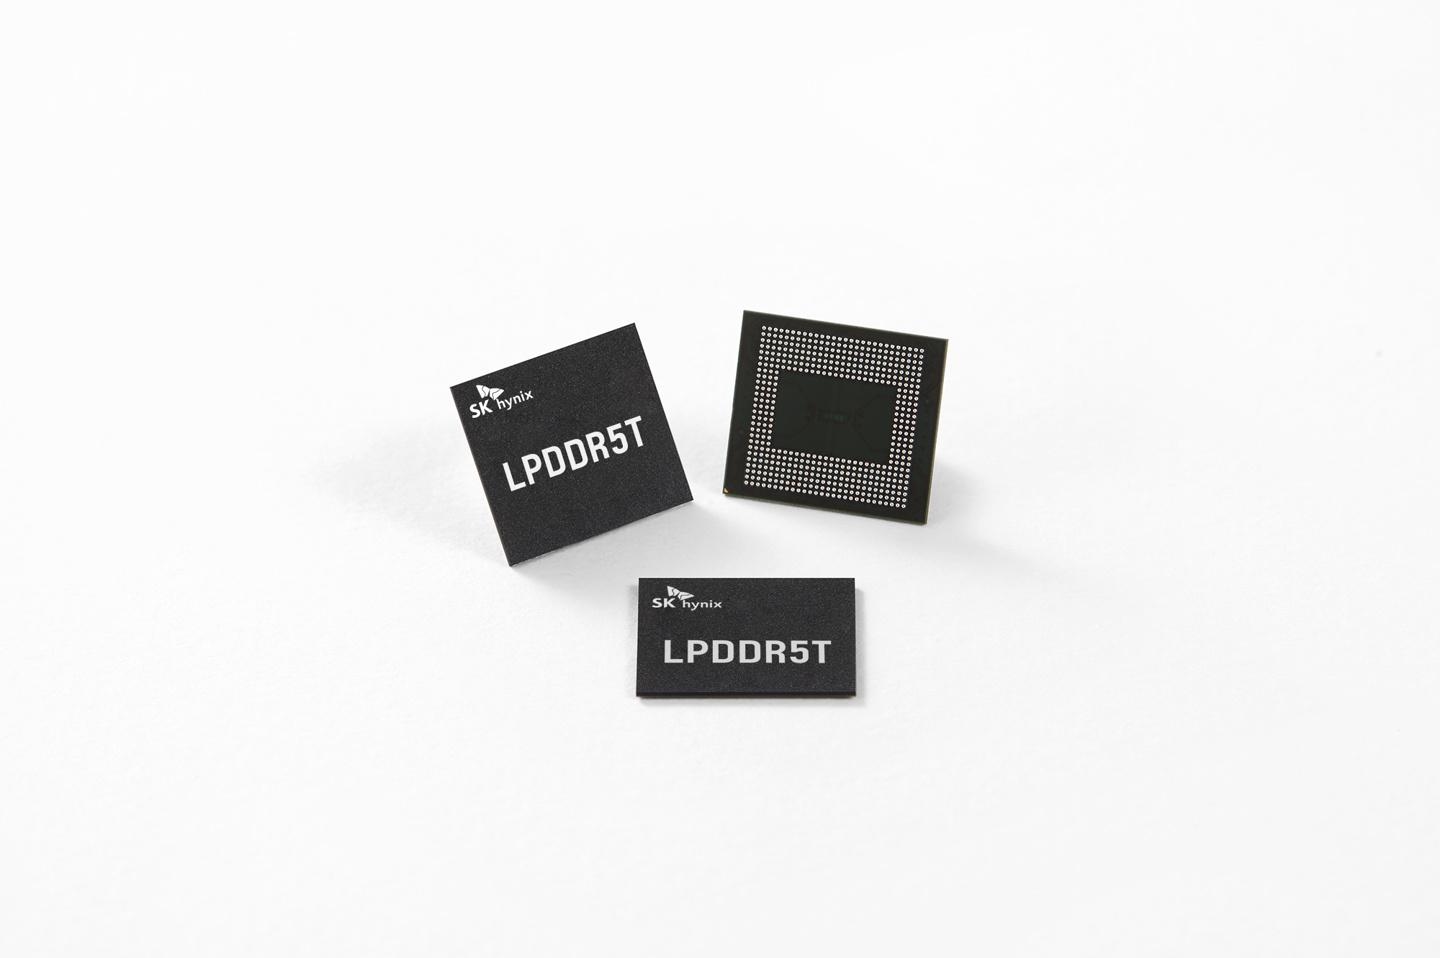 LPDDR5T chip front and back views